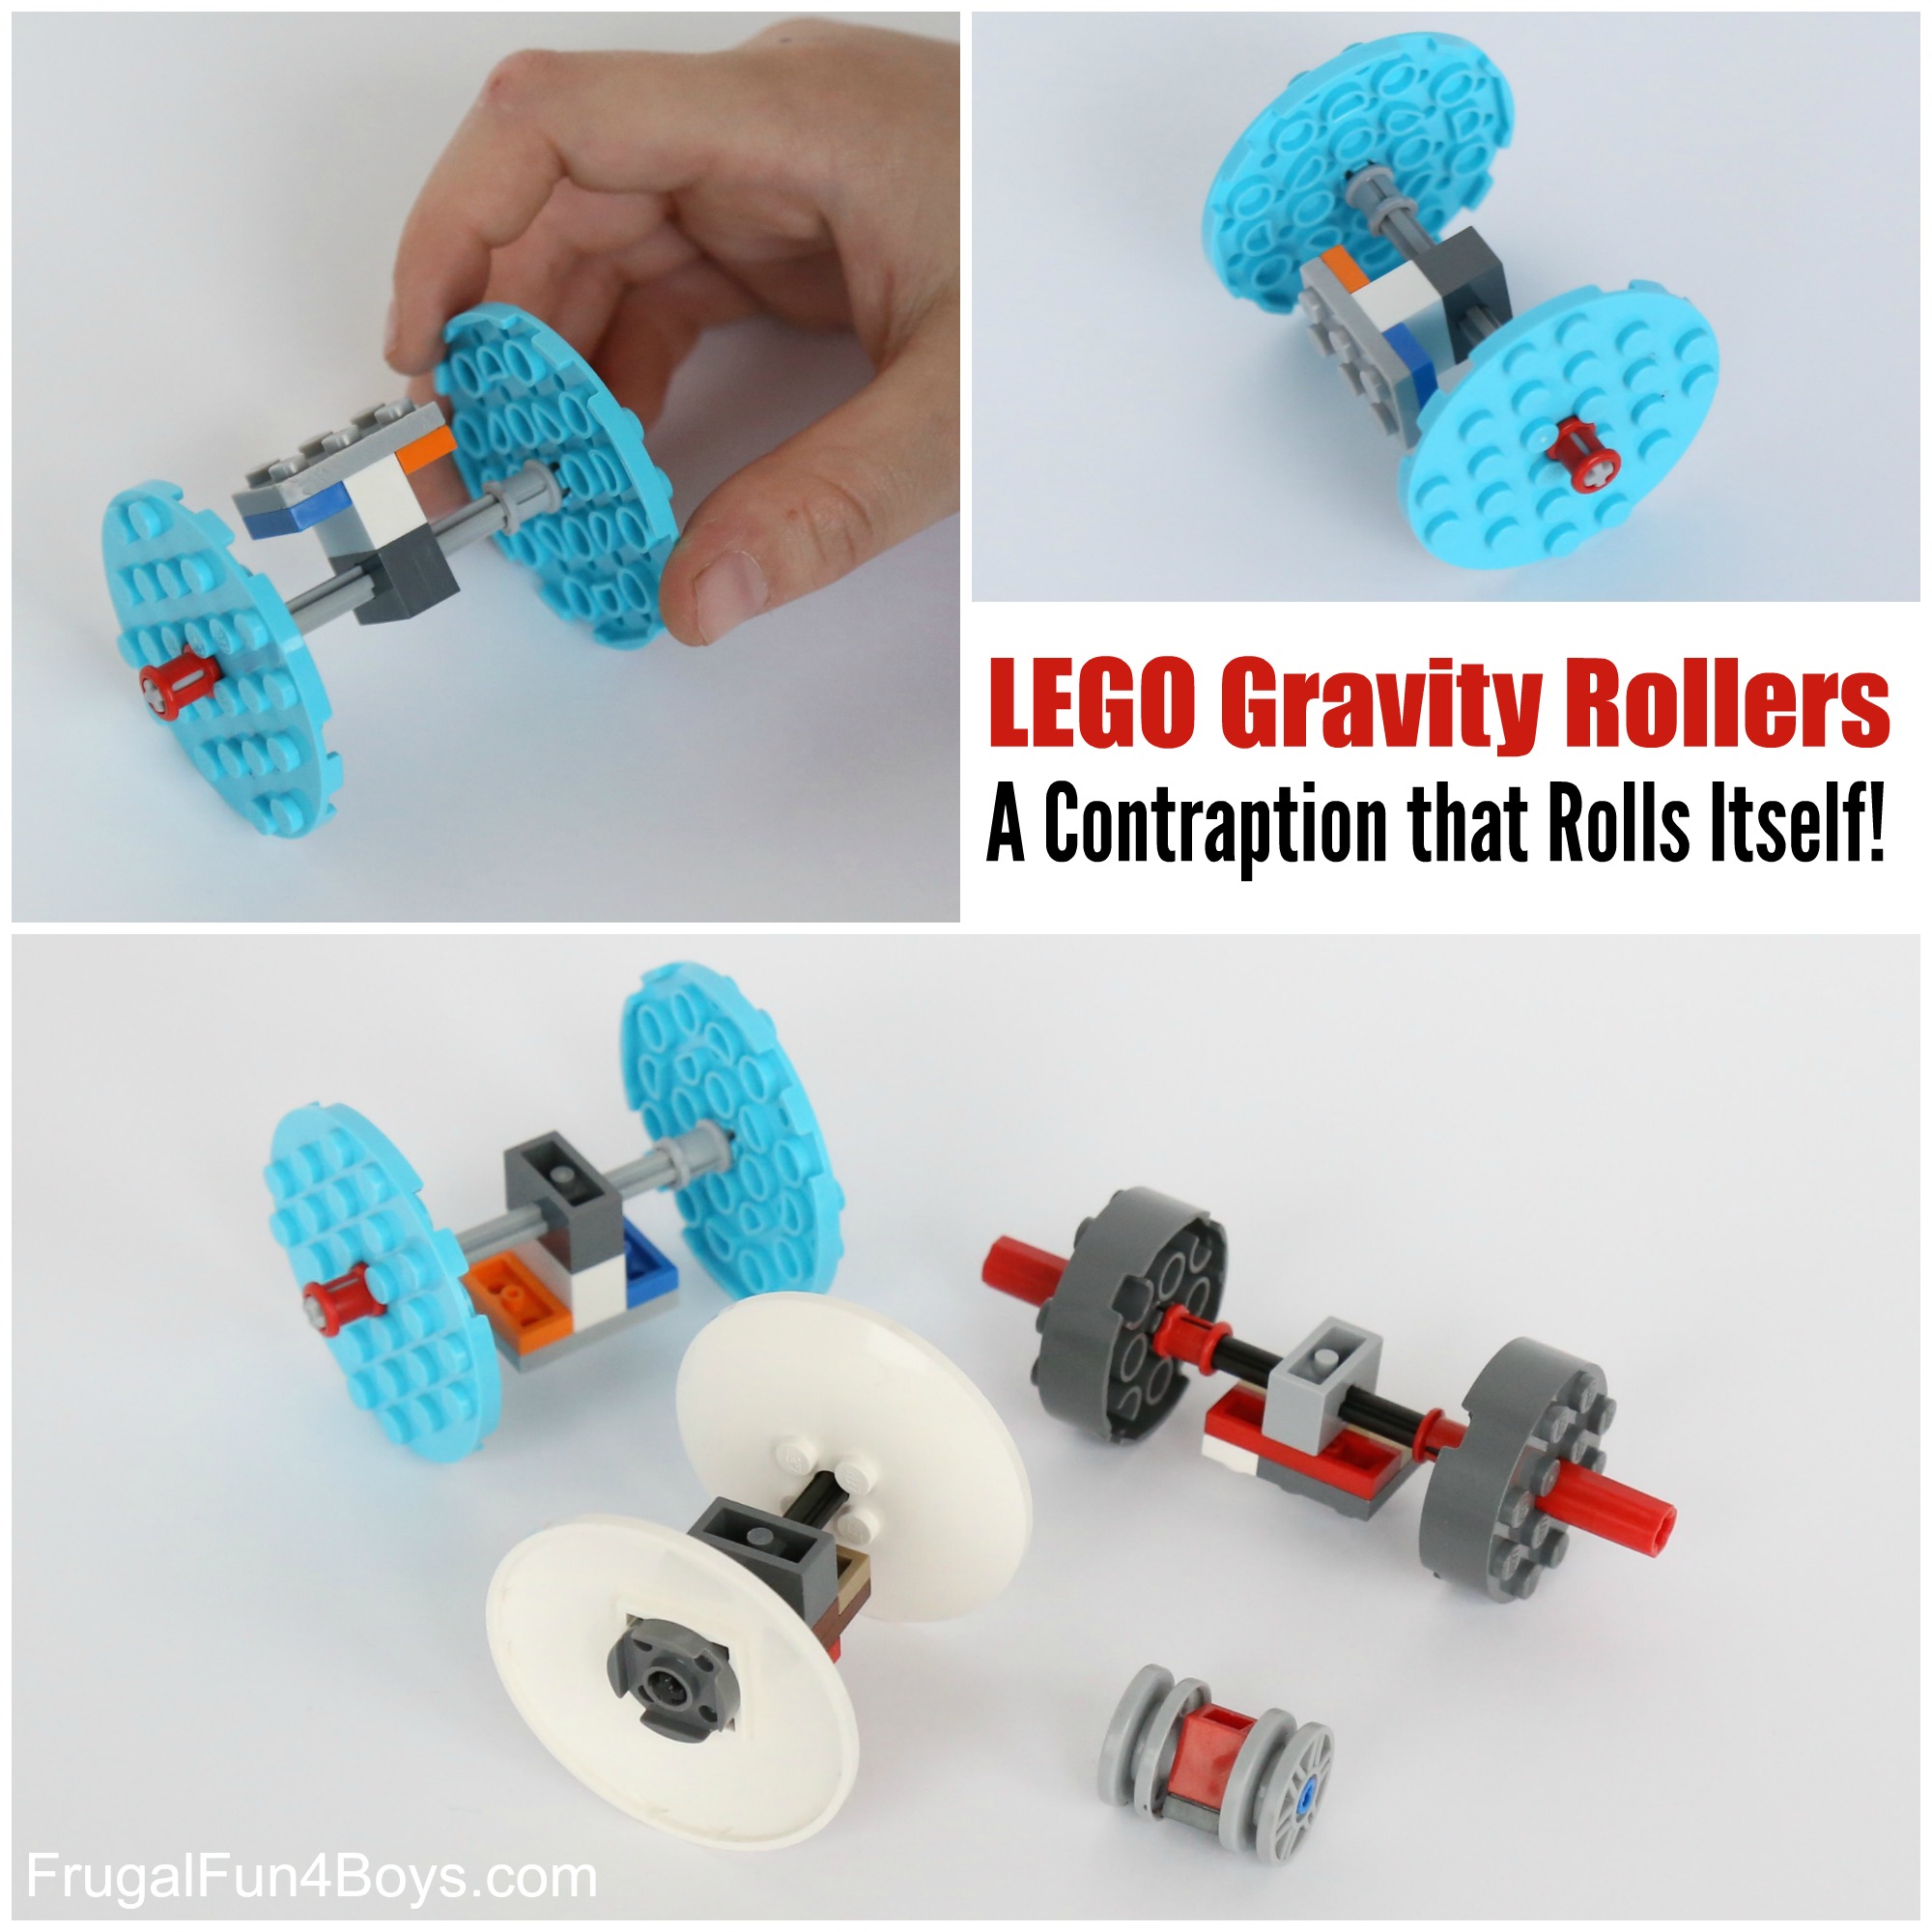 LEGO Gravity Rollers: A Contraption that Rolls Itself!